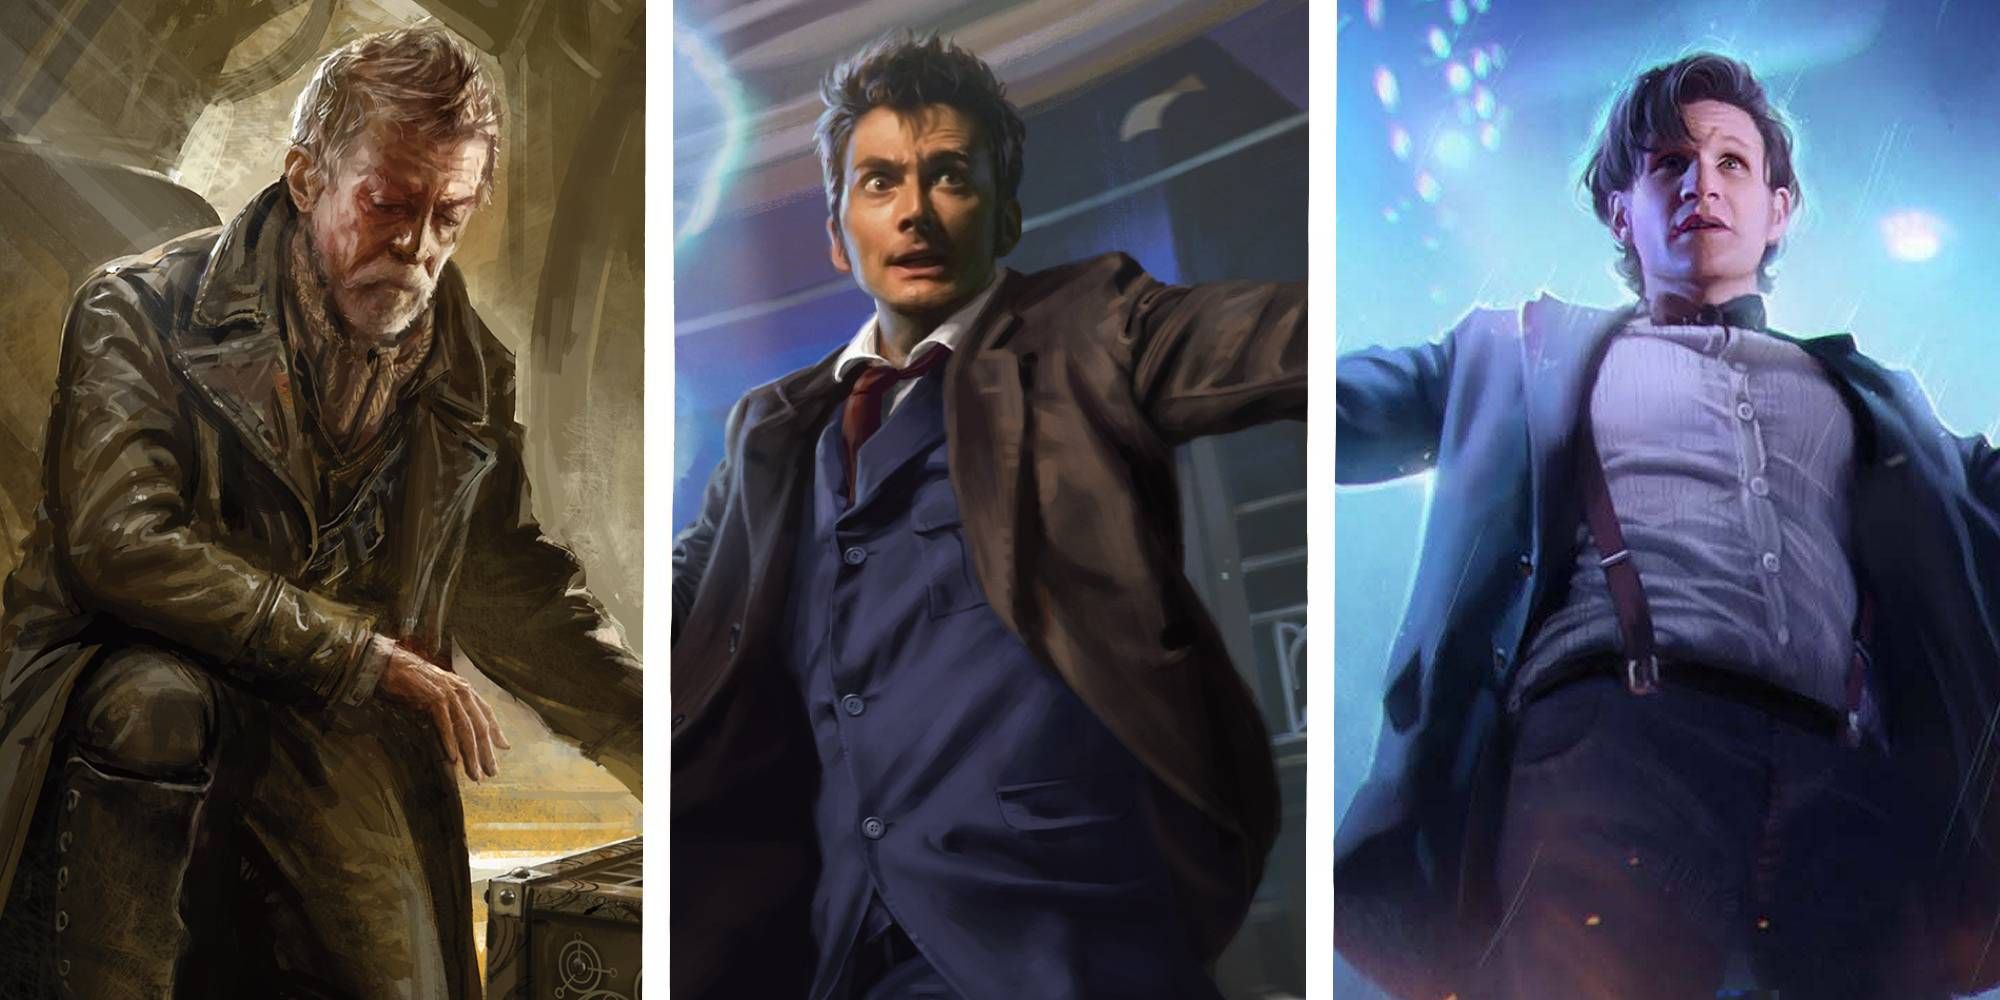 All Doctor Who Doctor Magic The Gathering Cards Ranked Feature The War Doctor, The Tenth Doctor, and the Eleventh Doctor